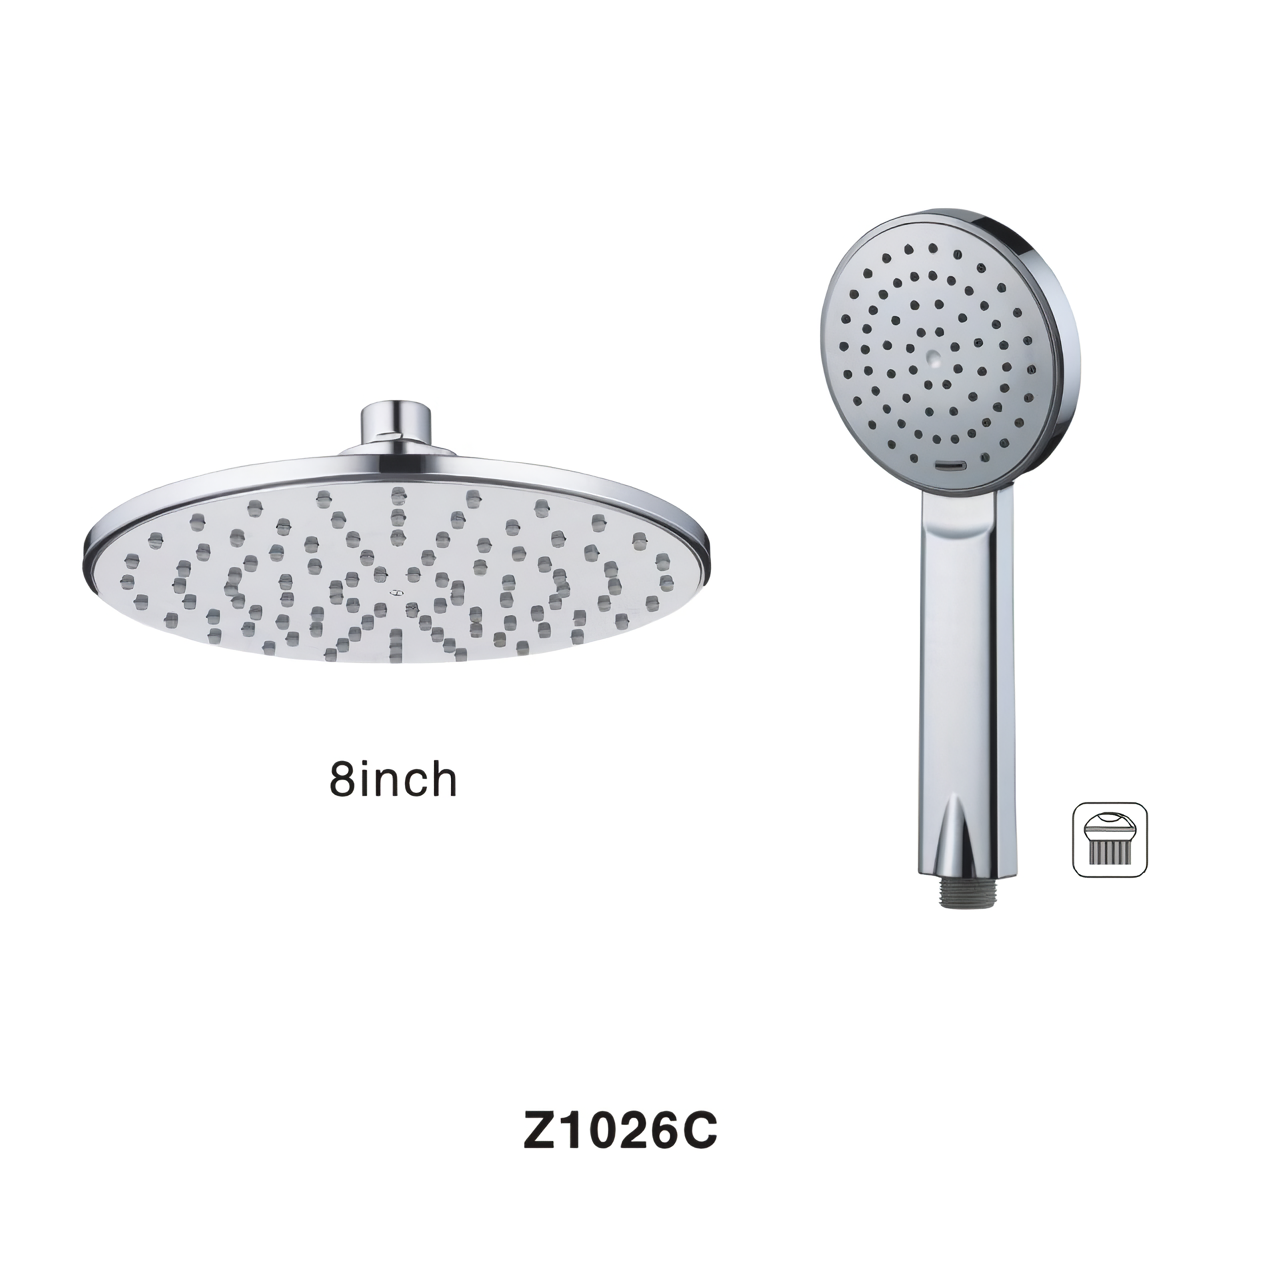 Z1026C Shower System Wall Mounted Shower Faucet Set with 8 inch High Pressure Plastic Shower Head Polished Chrome One Function Plastic Hand Shower